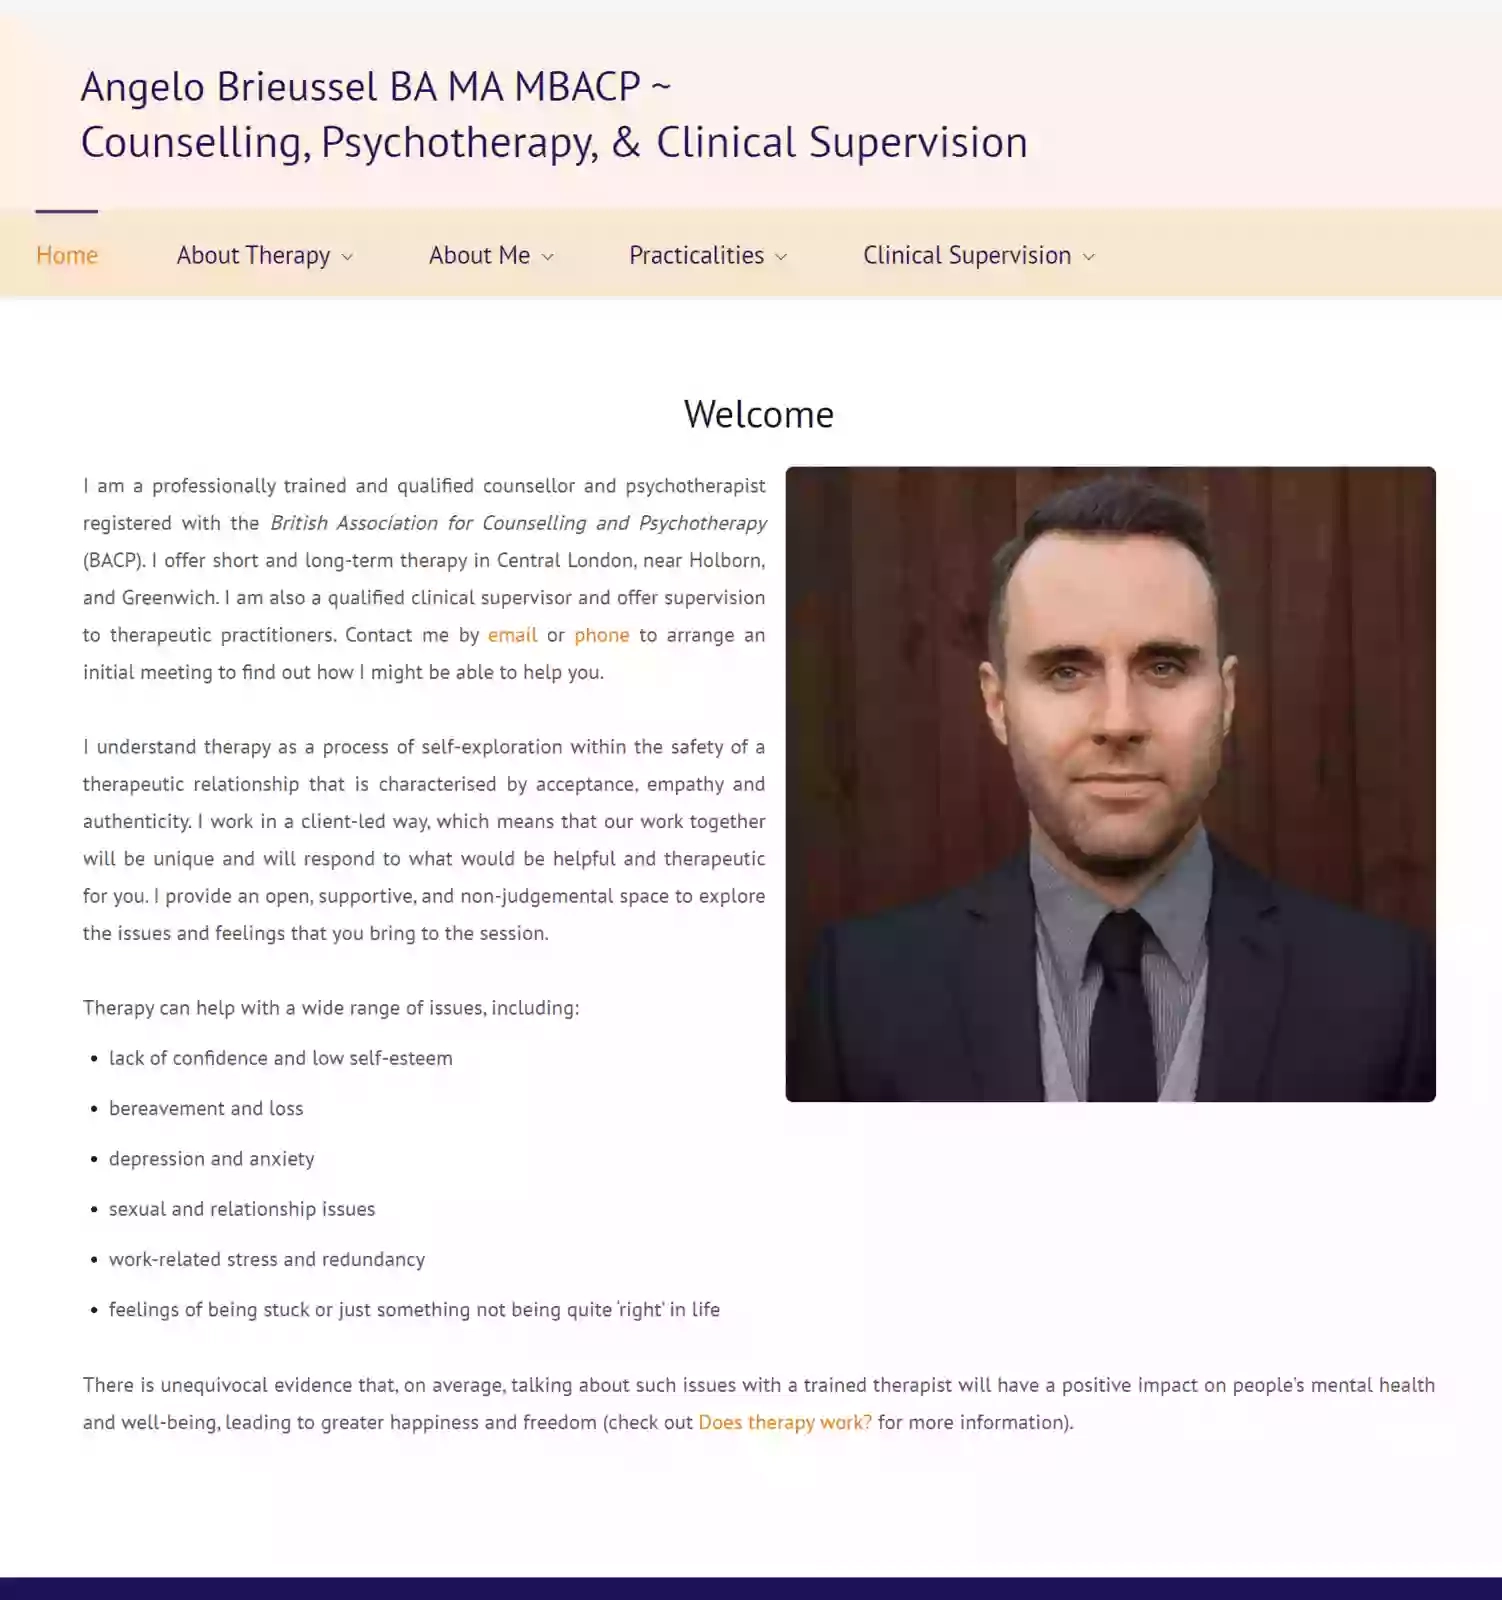 Angelo Brieussel - Counselling, Psychotherapy & Clinical Supervision